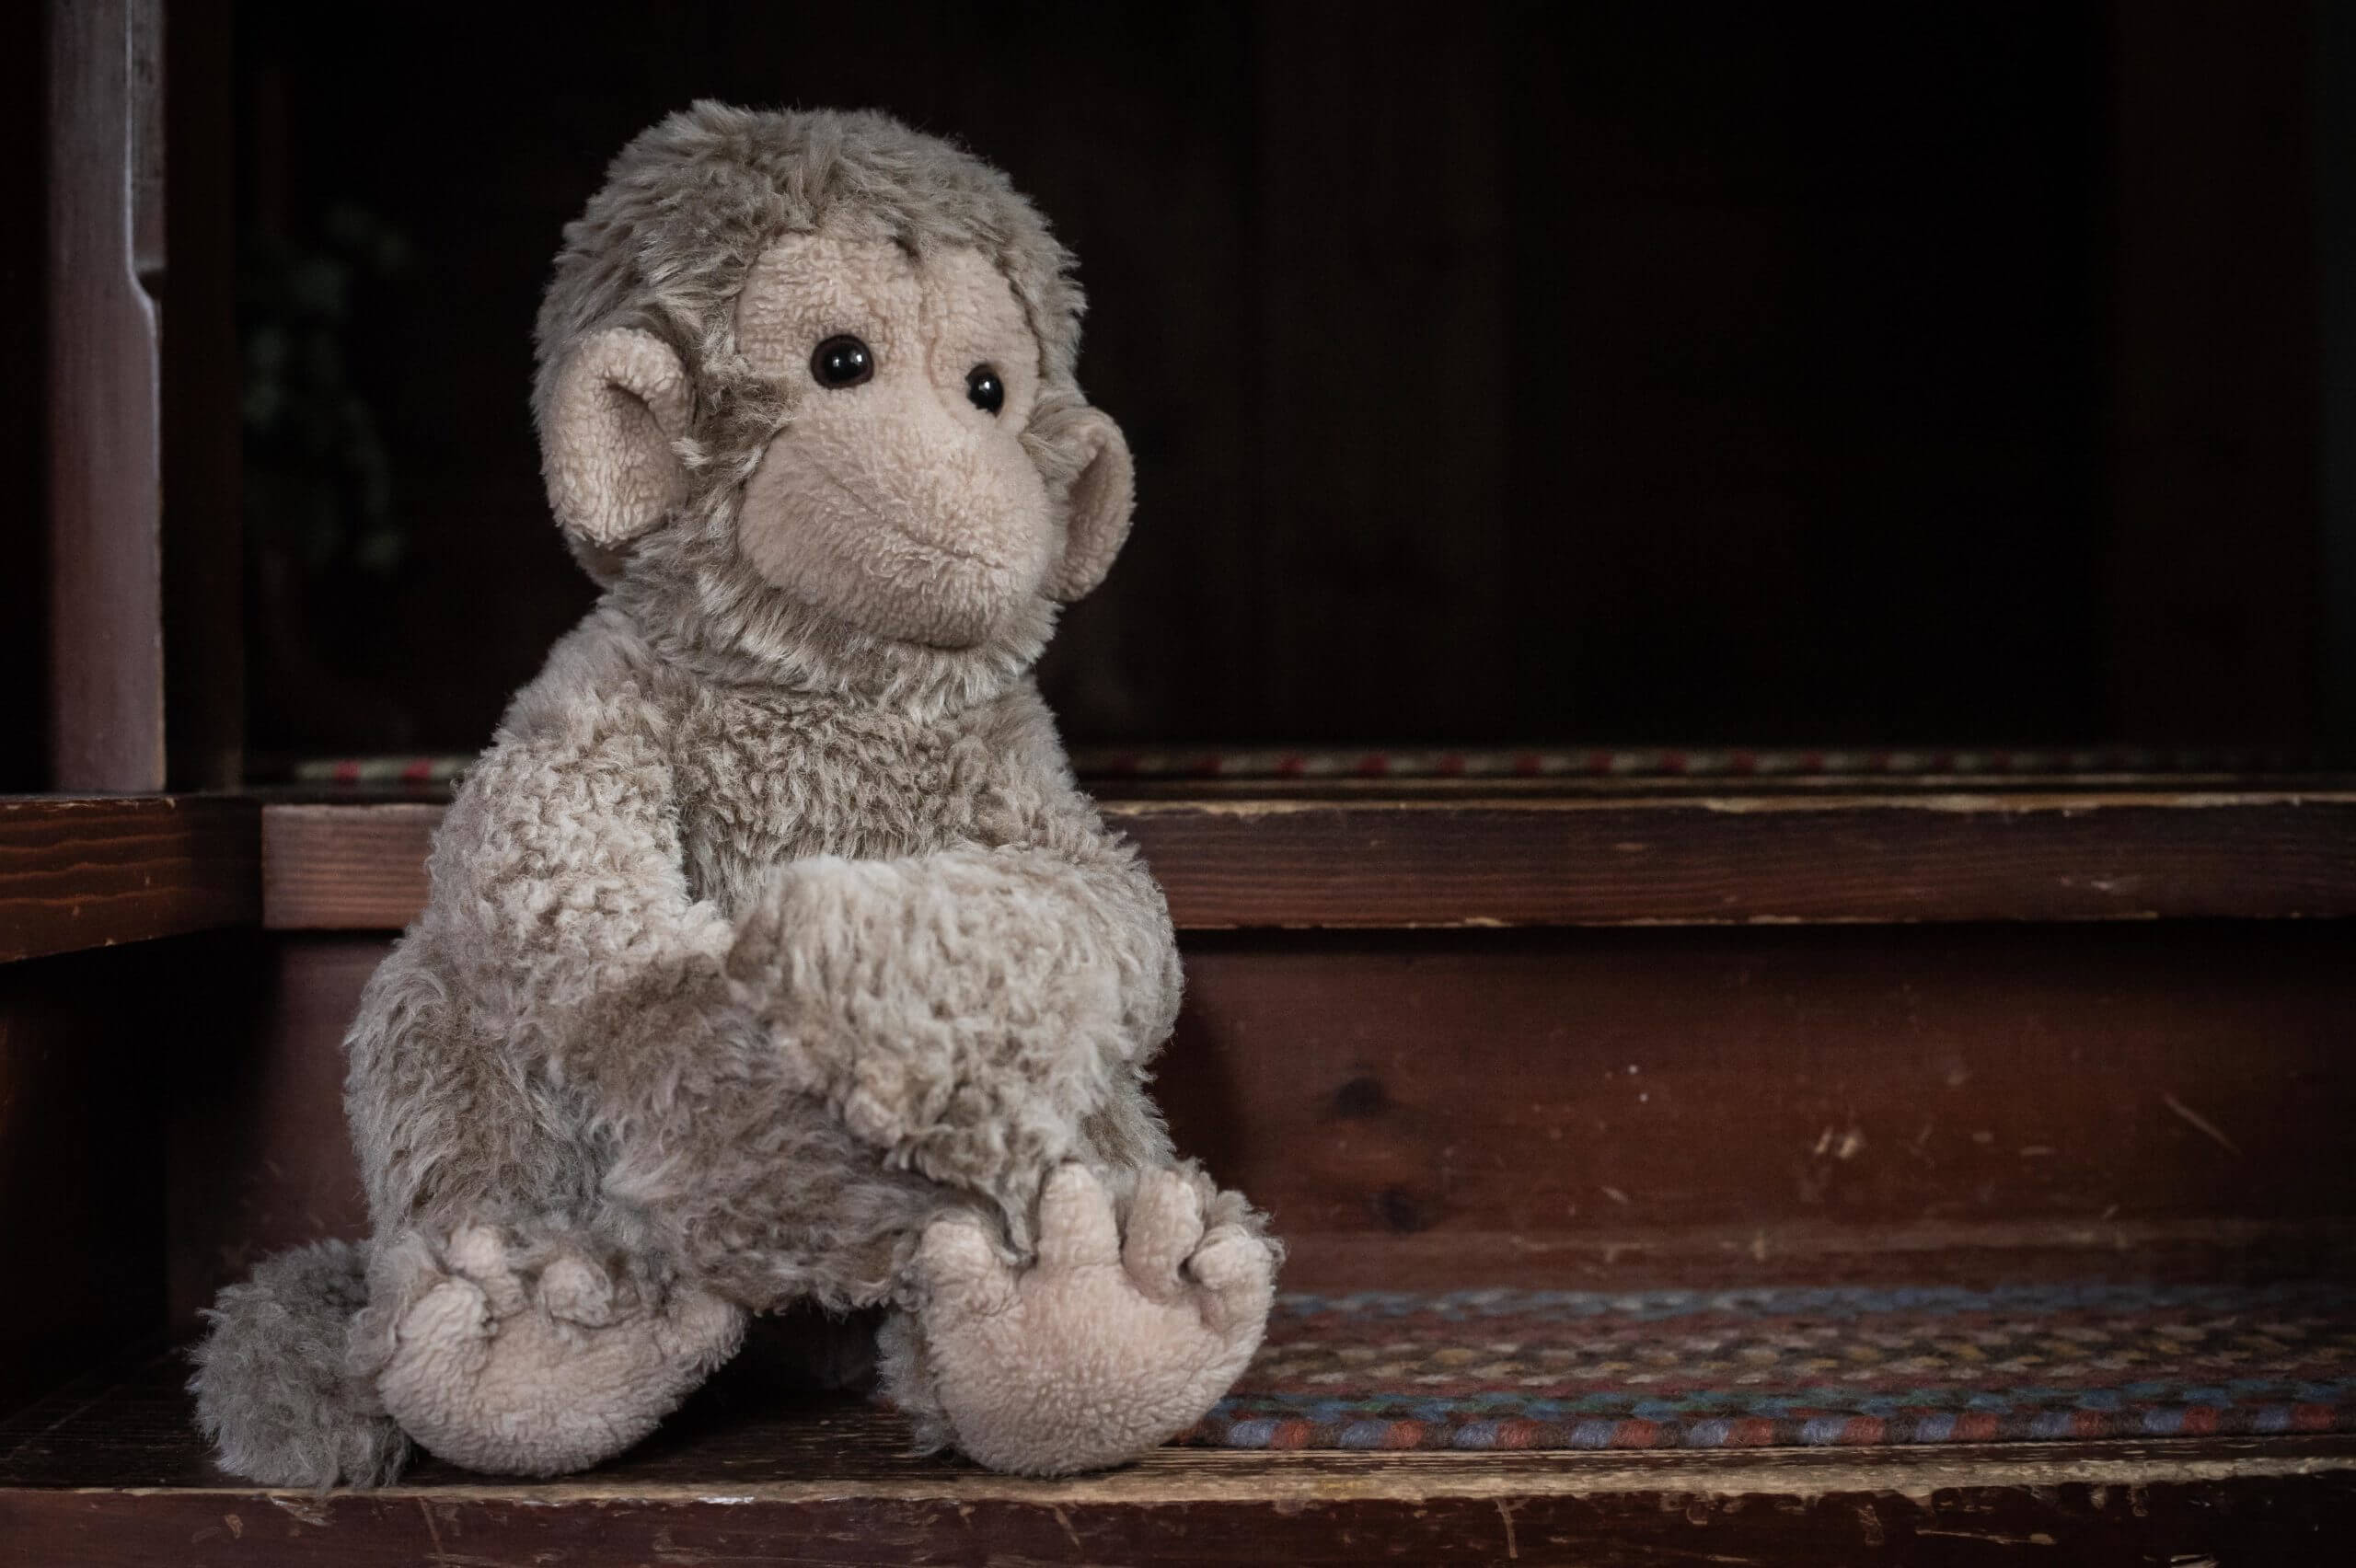 Color image of a stuffed animal money, with tan fur, sitting on a wood step looking out the window.